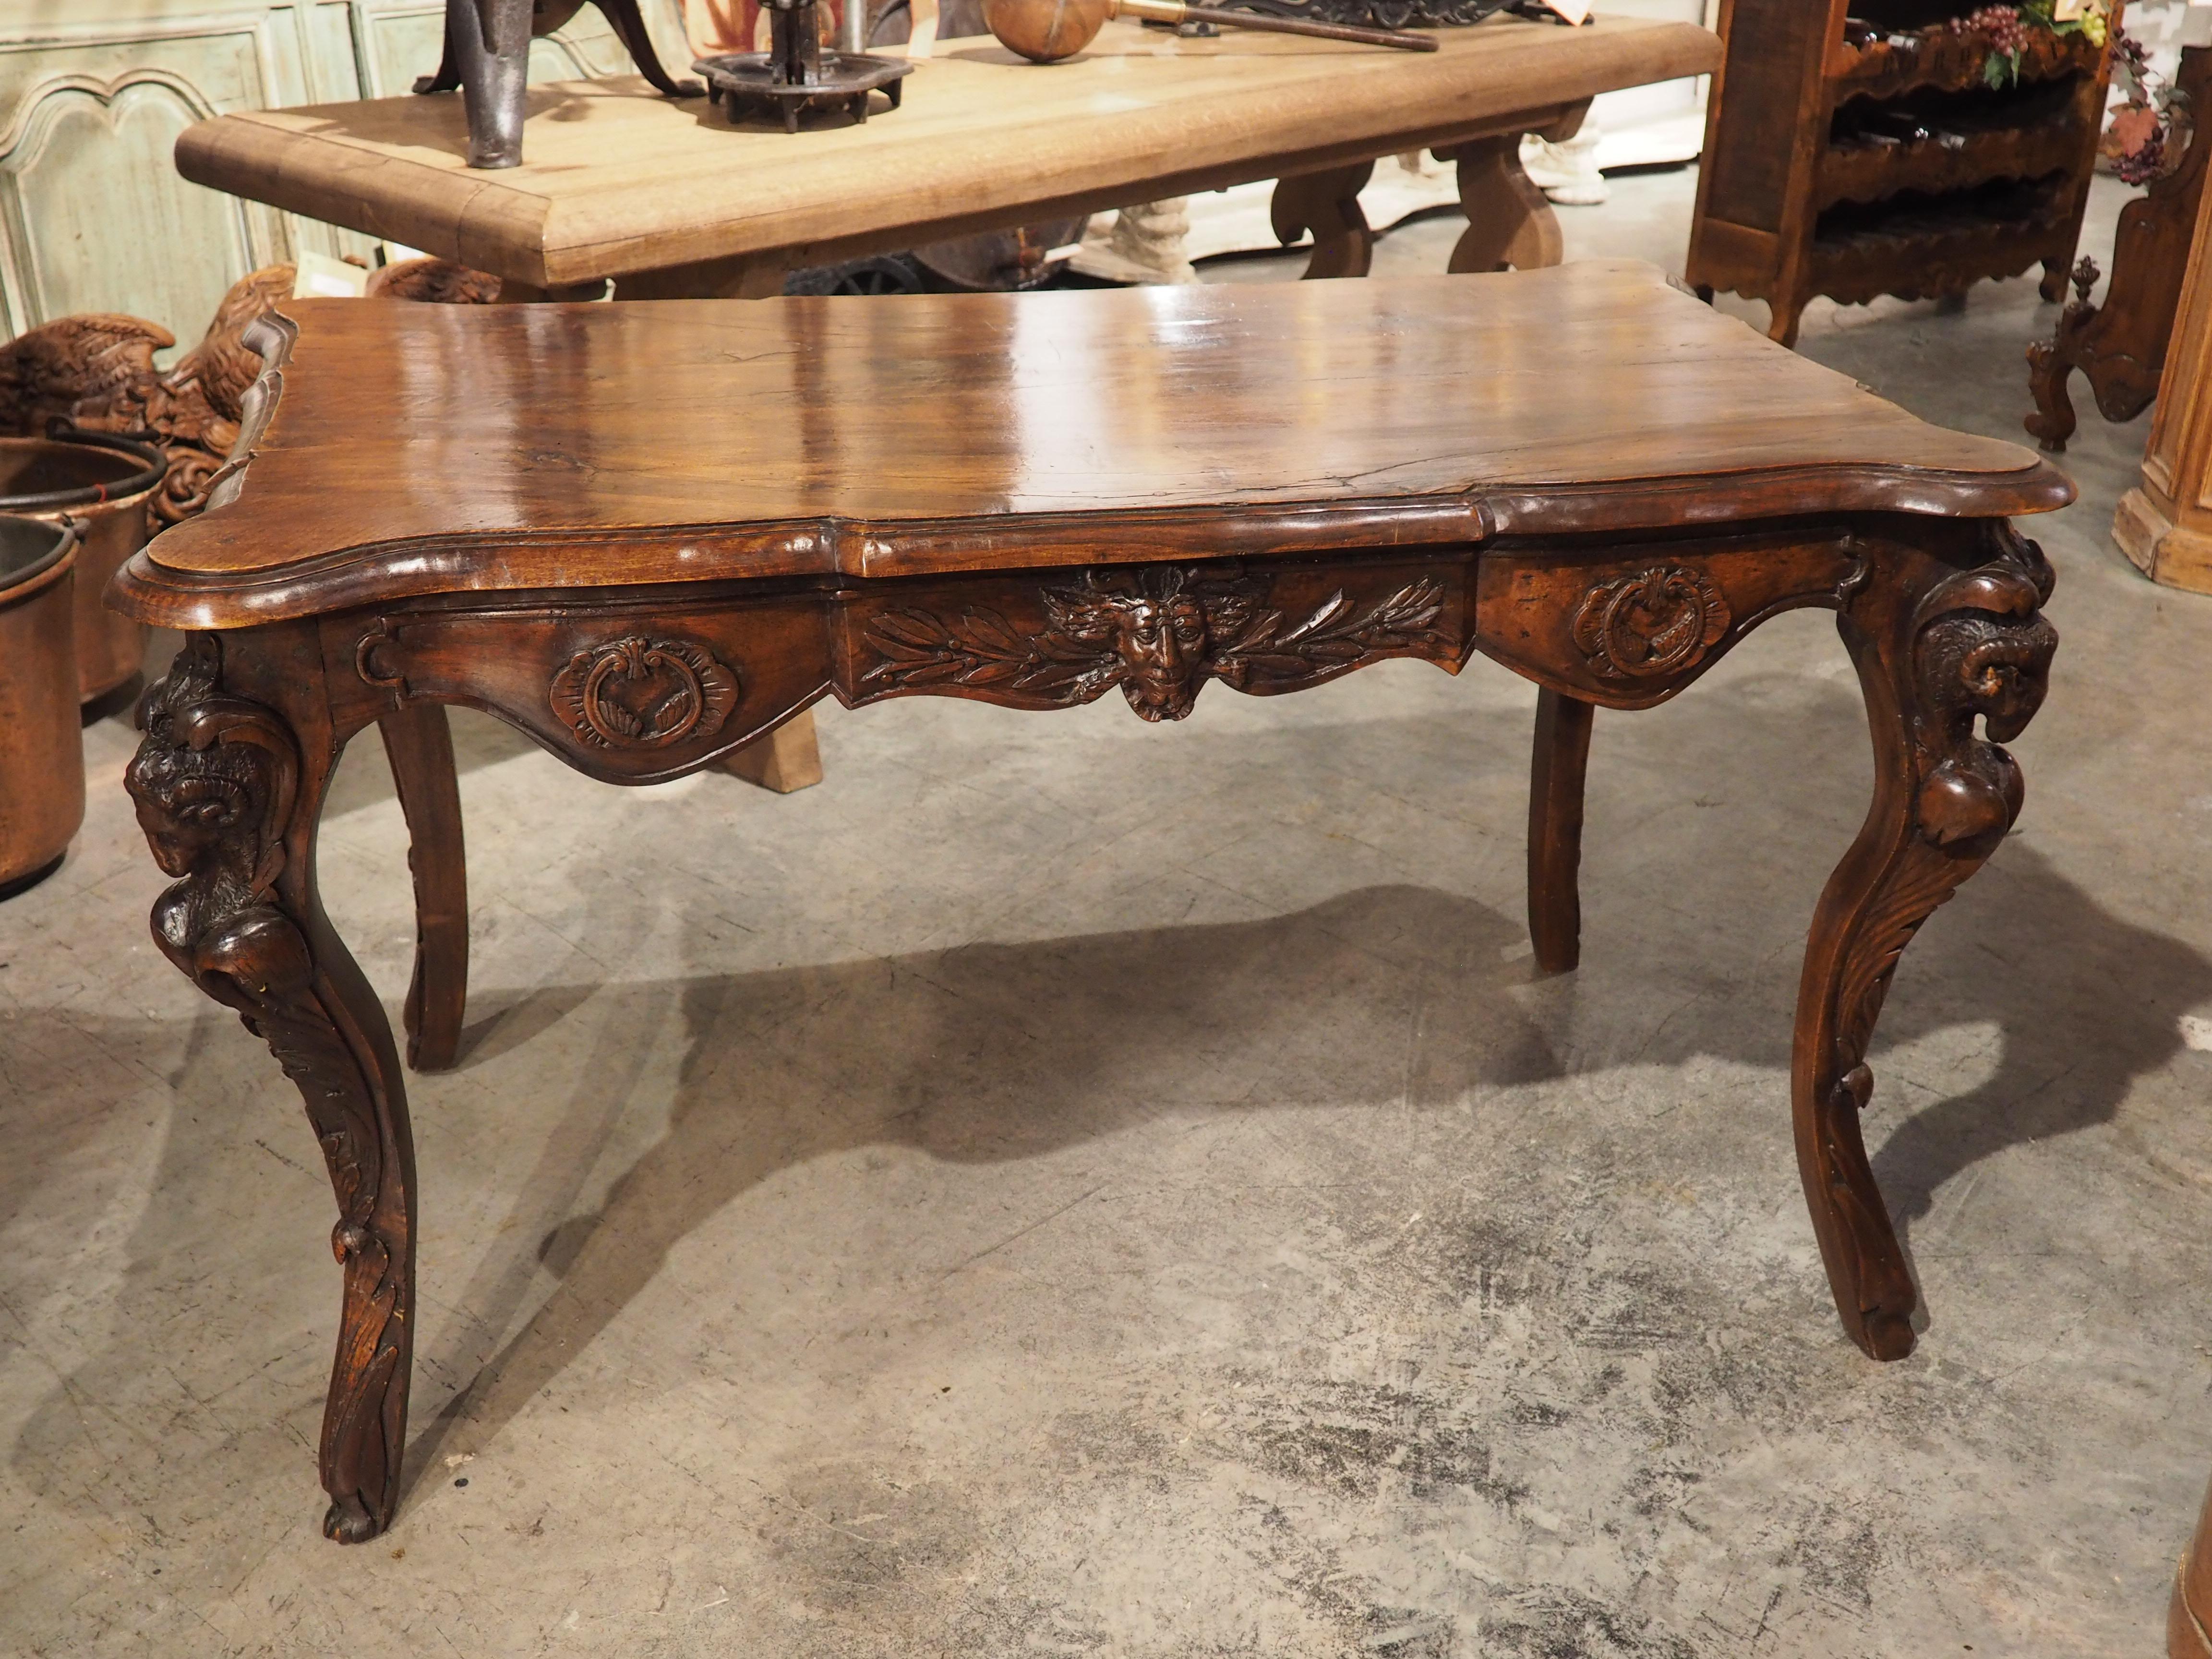 Circa 1870 French Walnut Wood Center Table with Rams' Heads and Fleur De Lys For Sale 1